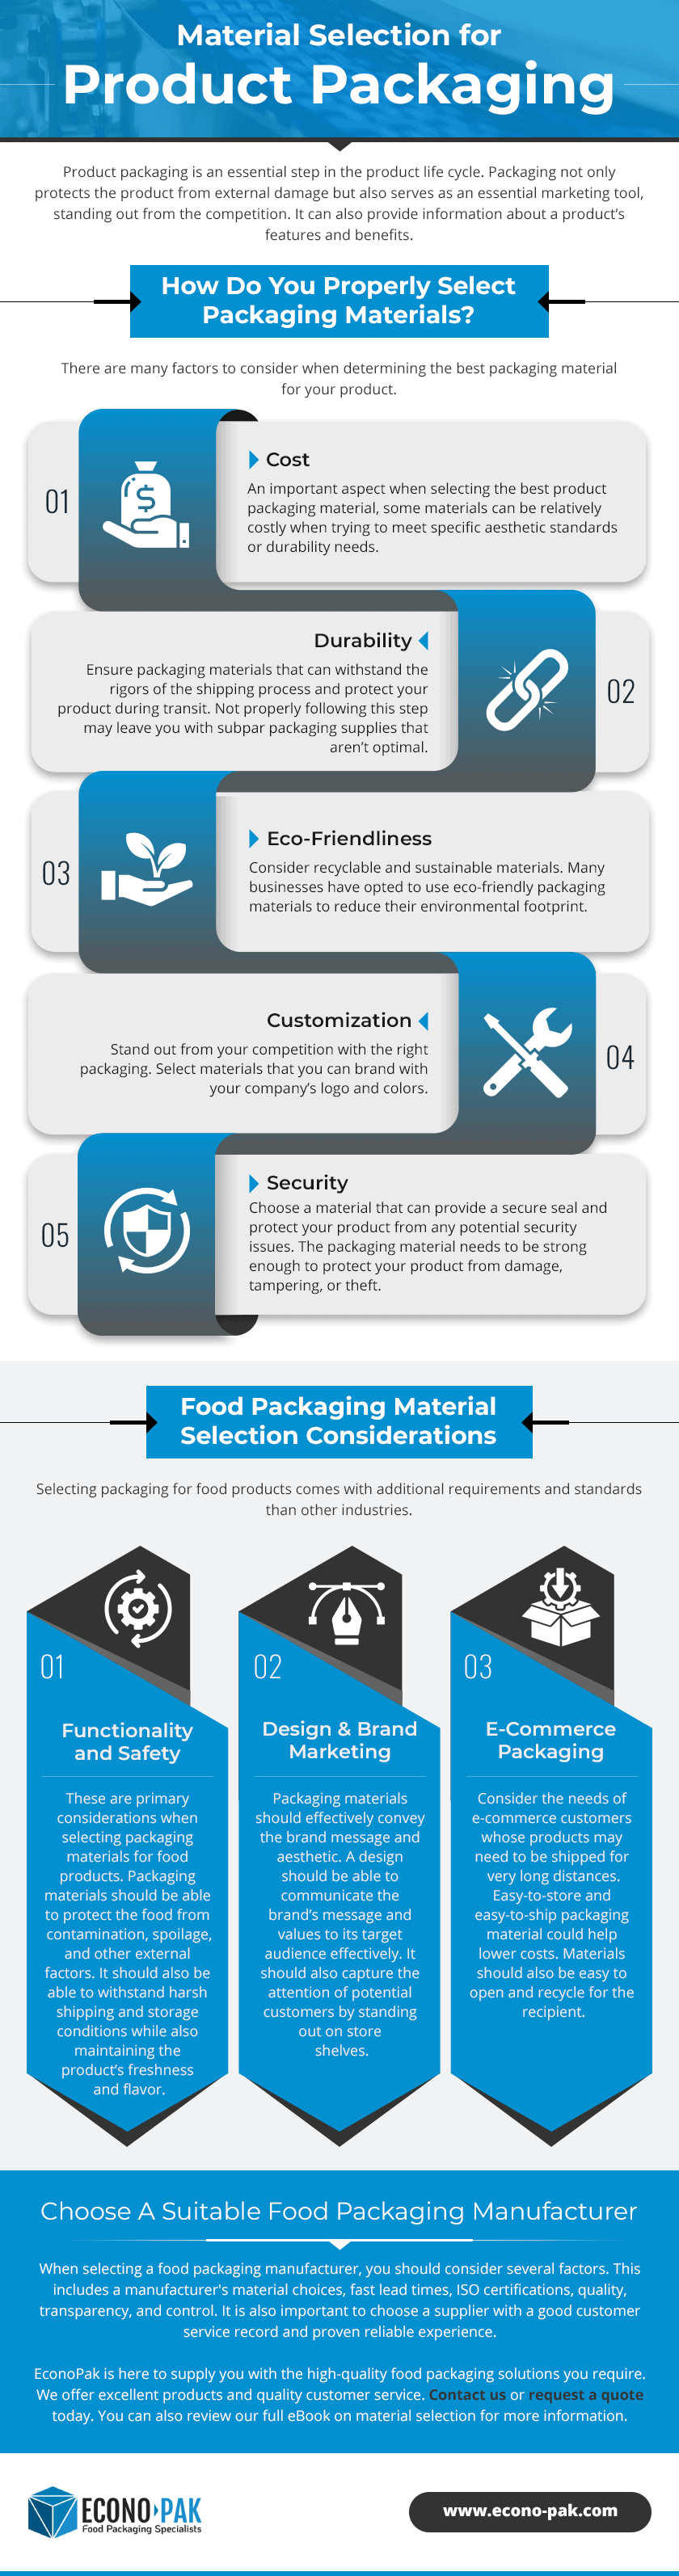 Material Selection for Product Packaging